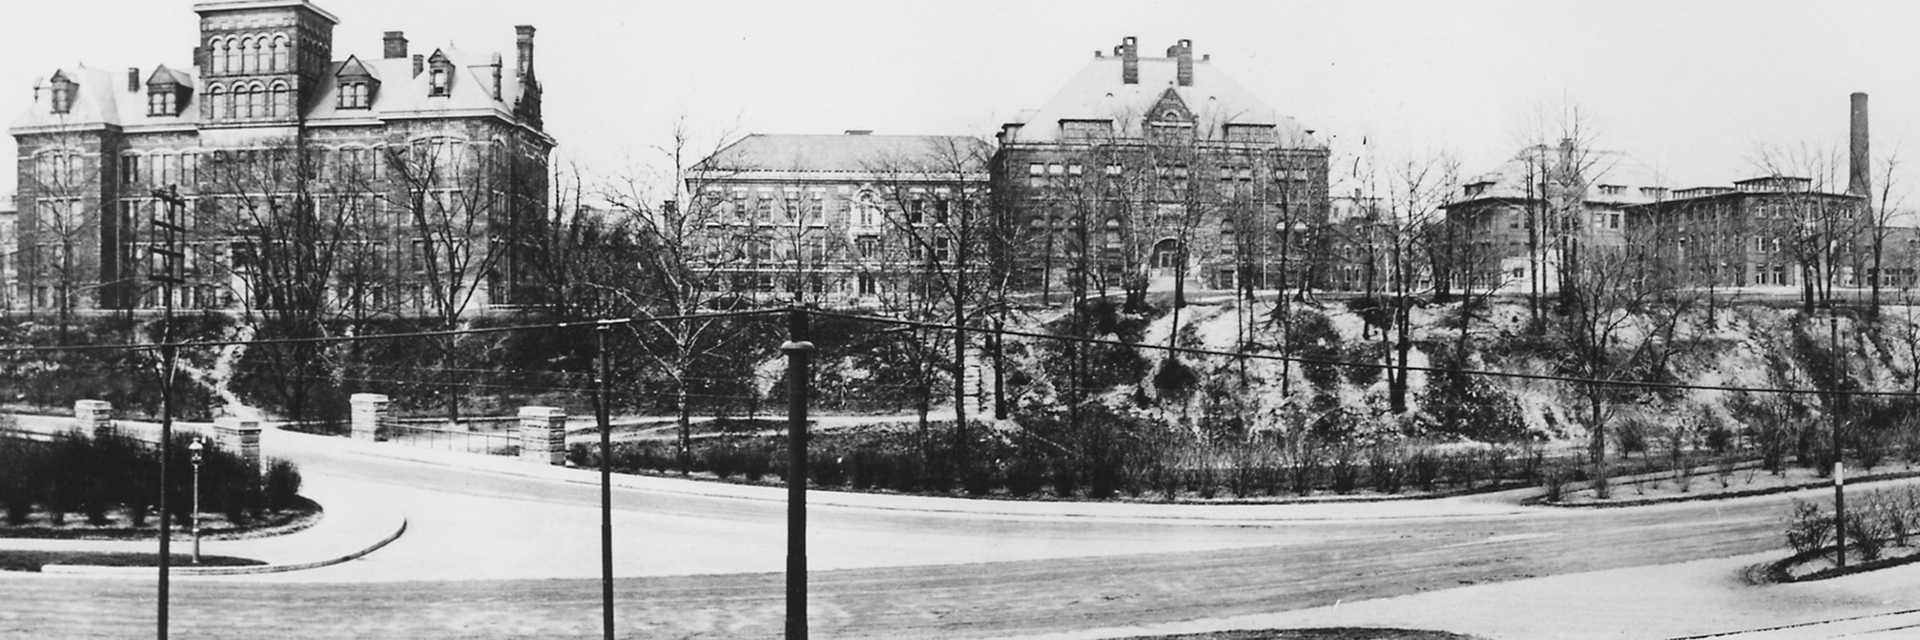 Black and white photo of the Case Western Reserve University campus in the early 20th century